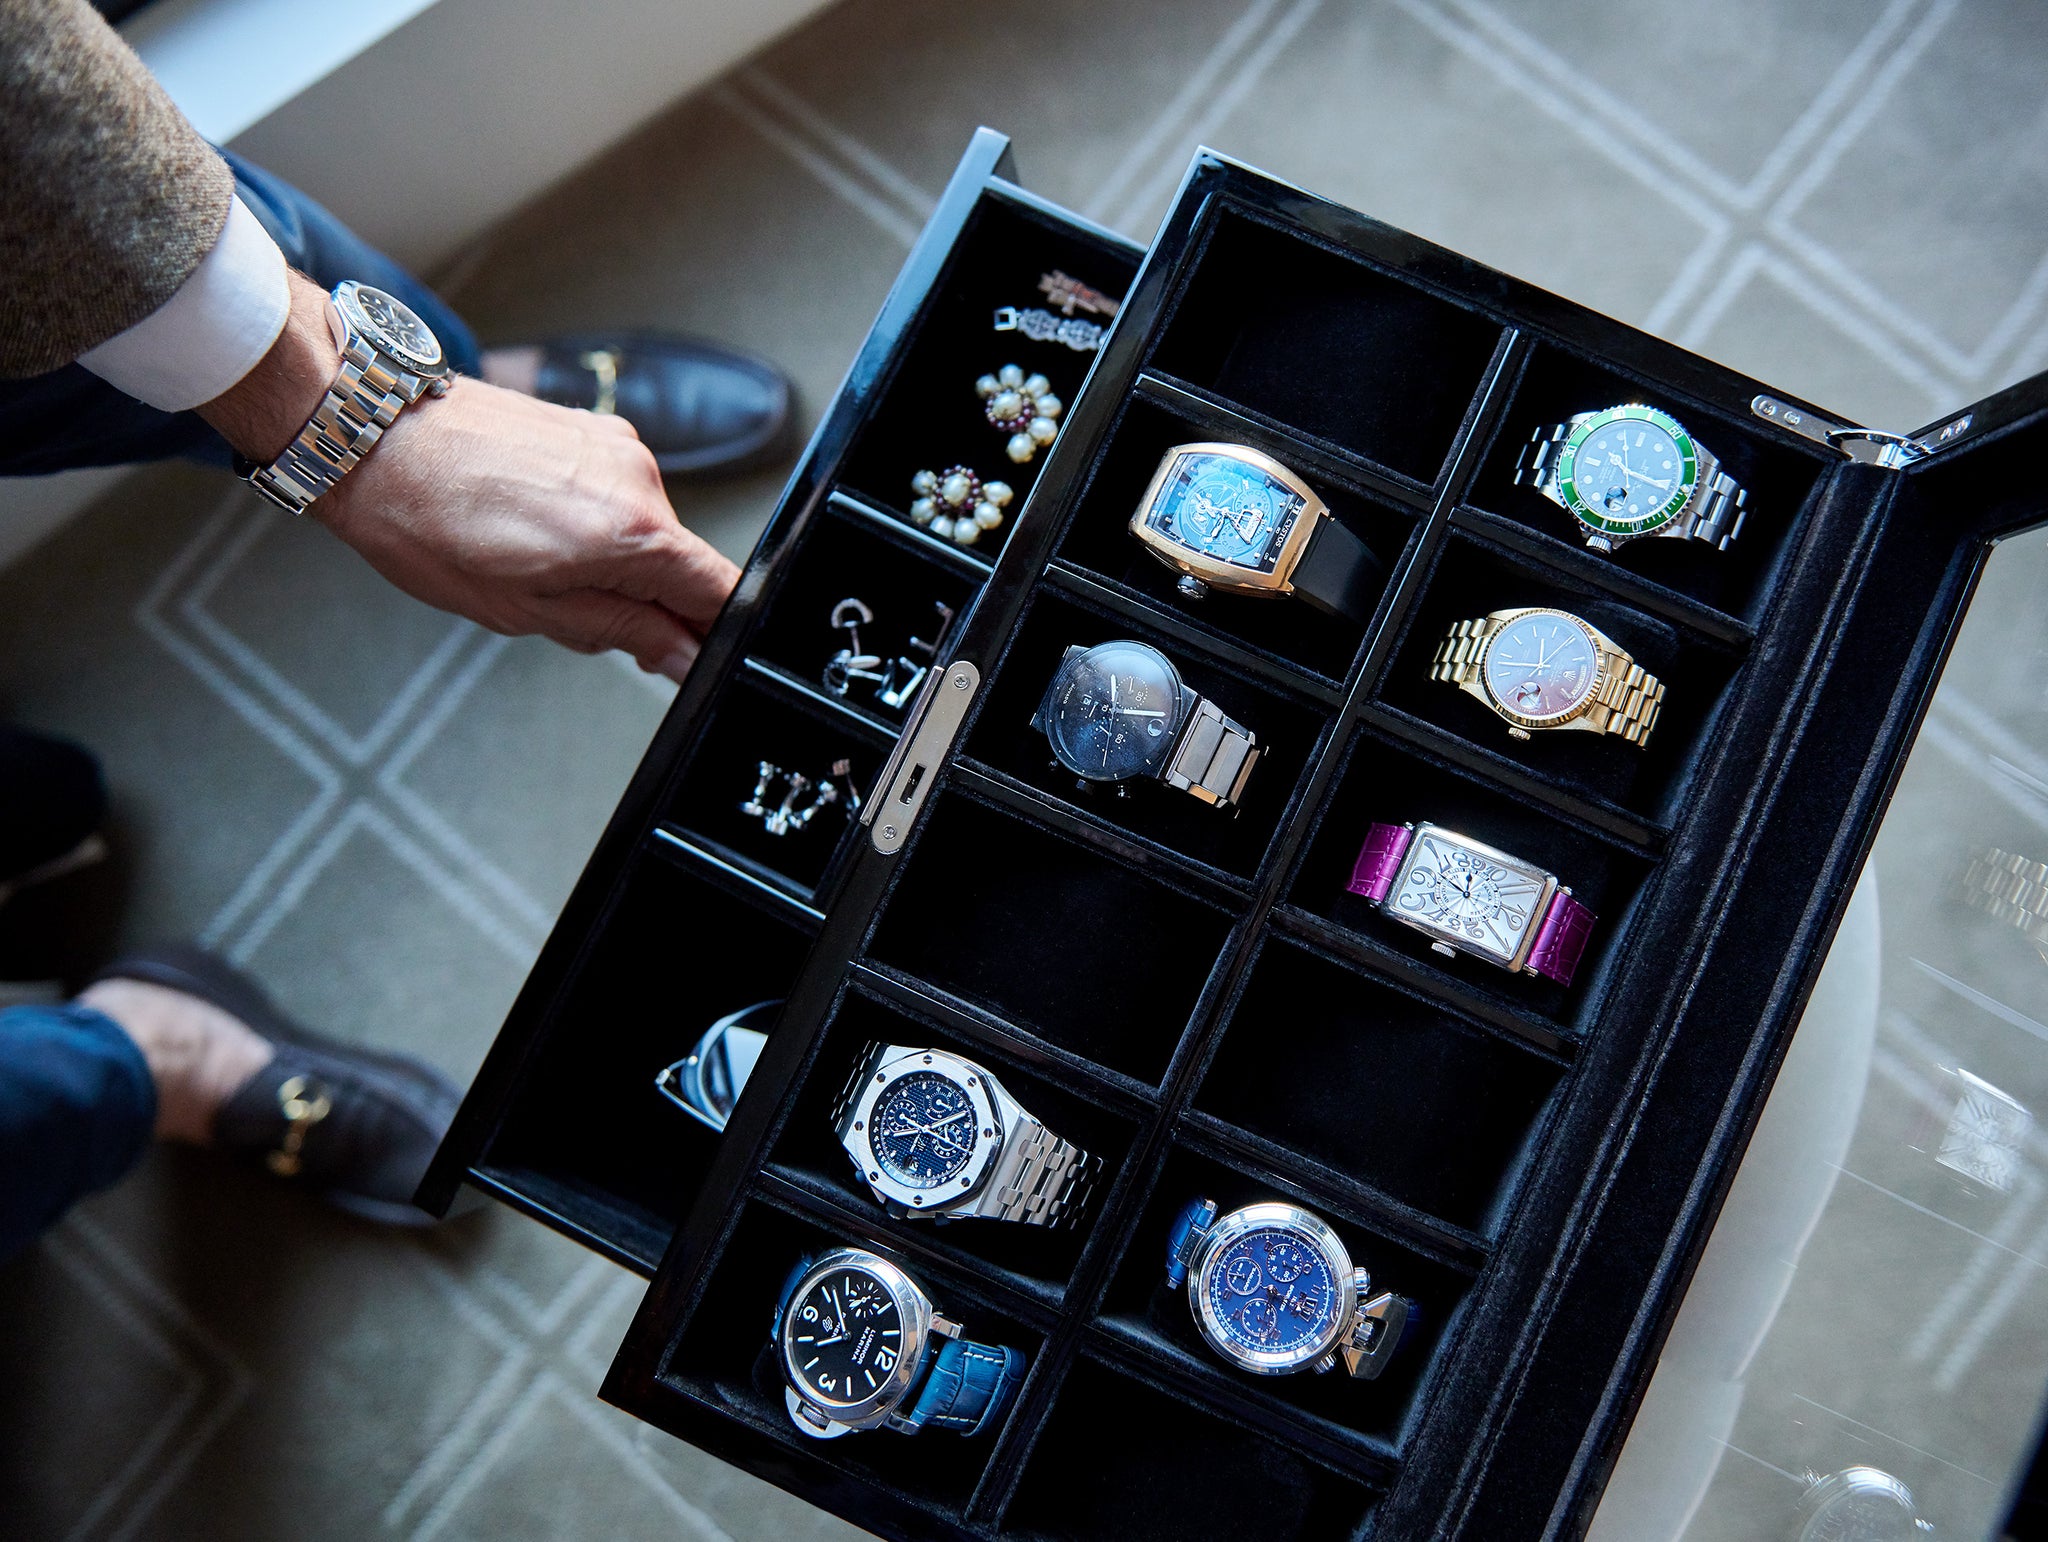 Specter' Elegant, 12 Slot Watch Box Organizer with Lock | Premium Jewelry & Watch Display Case | Storage Cases for Watches | Large, Glass Lid 